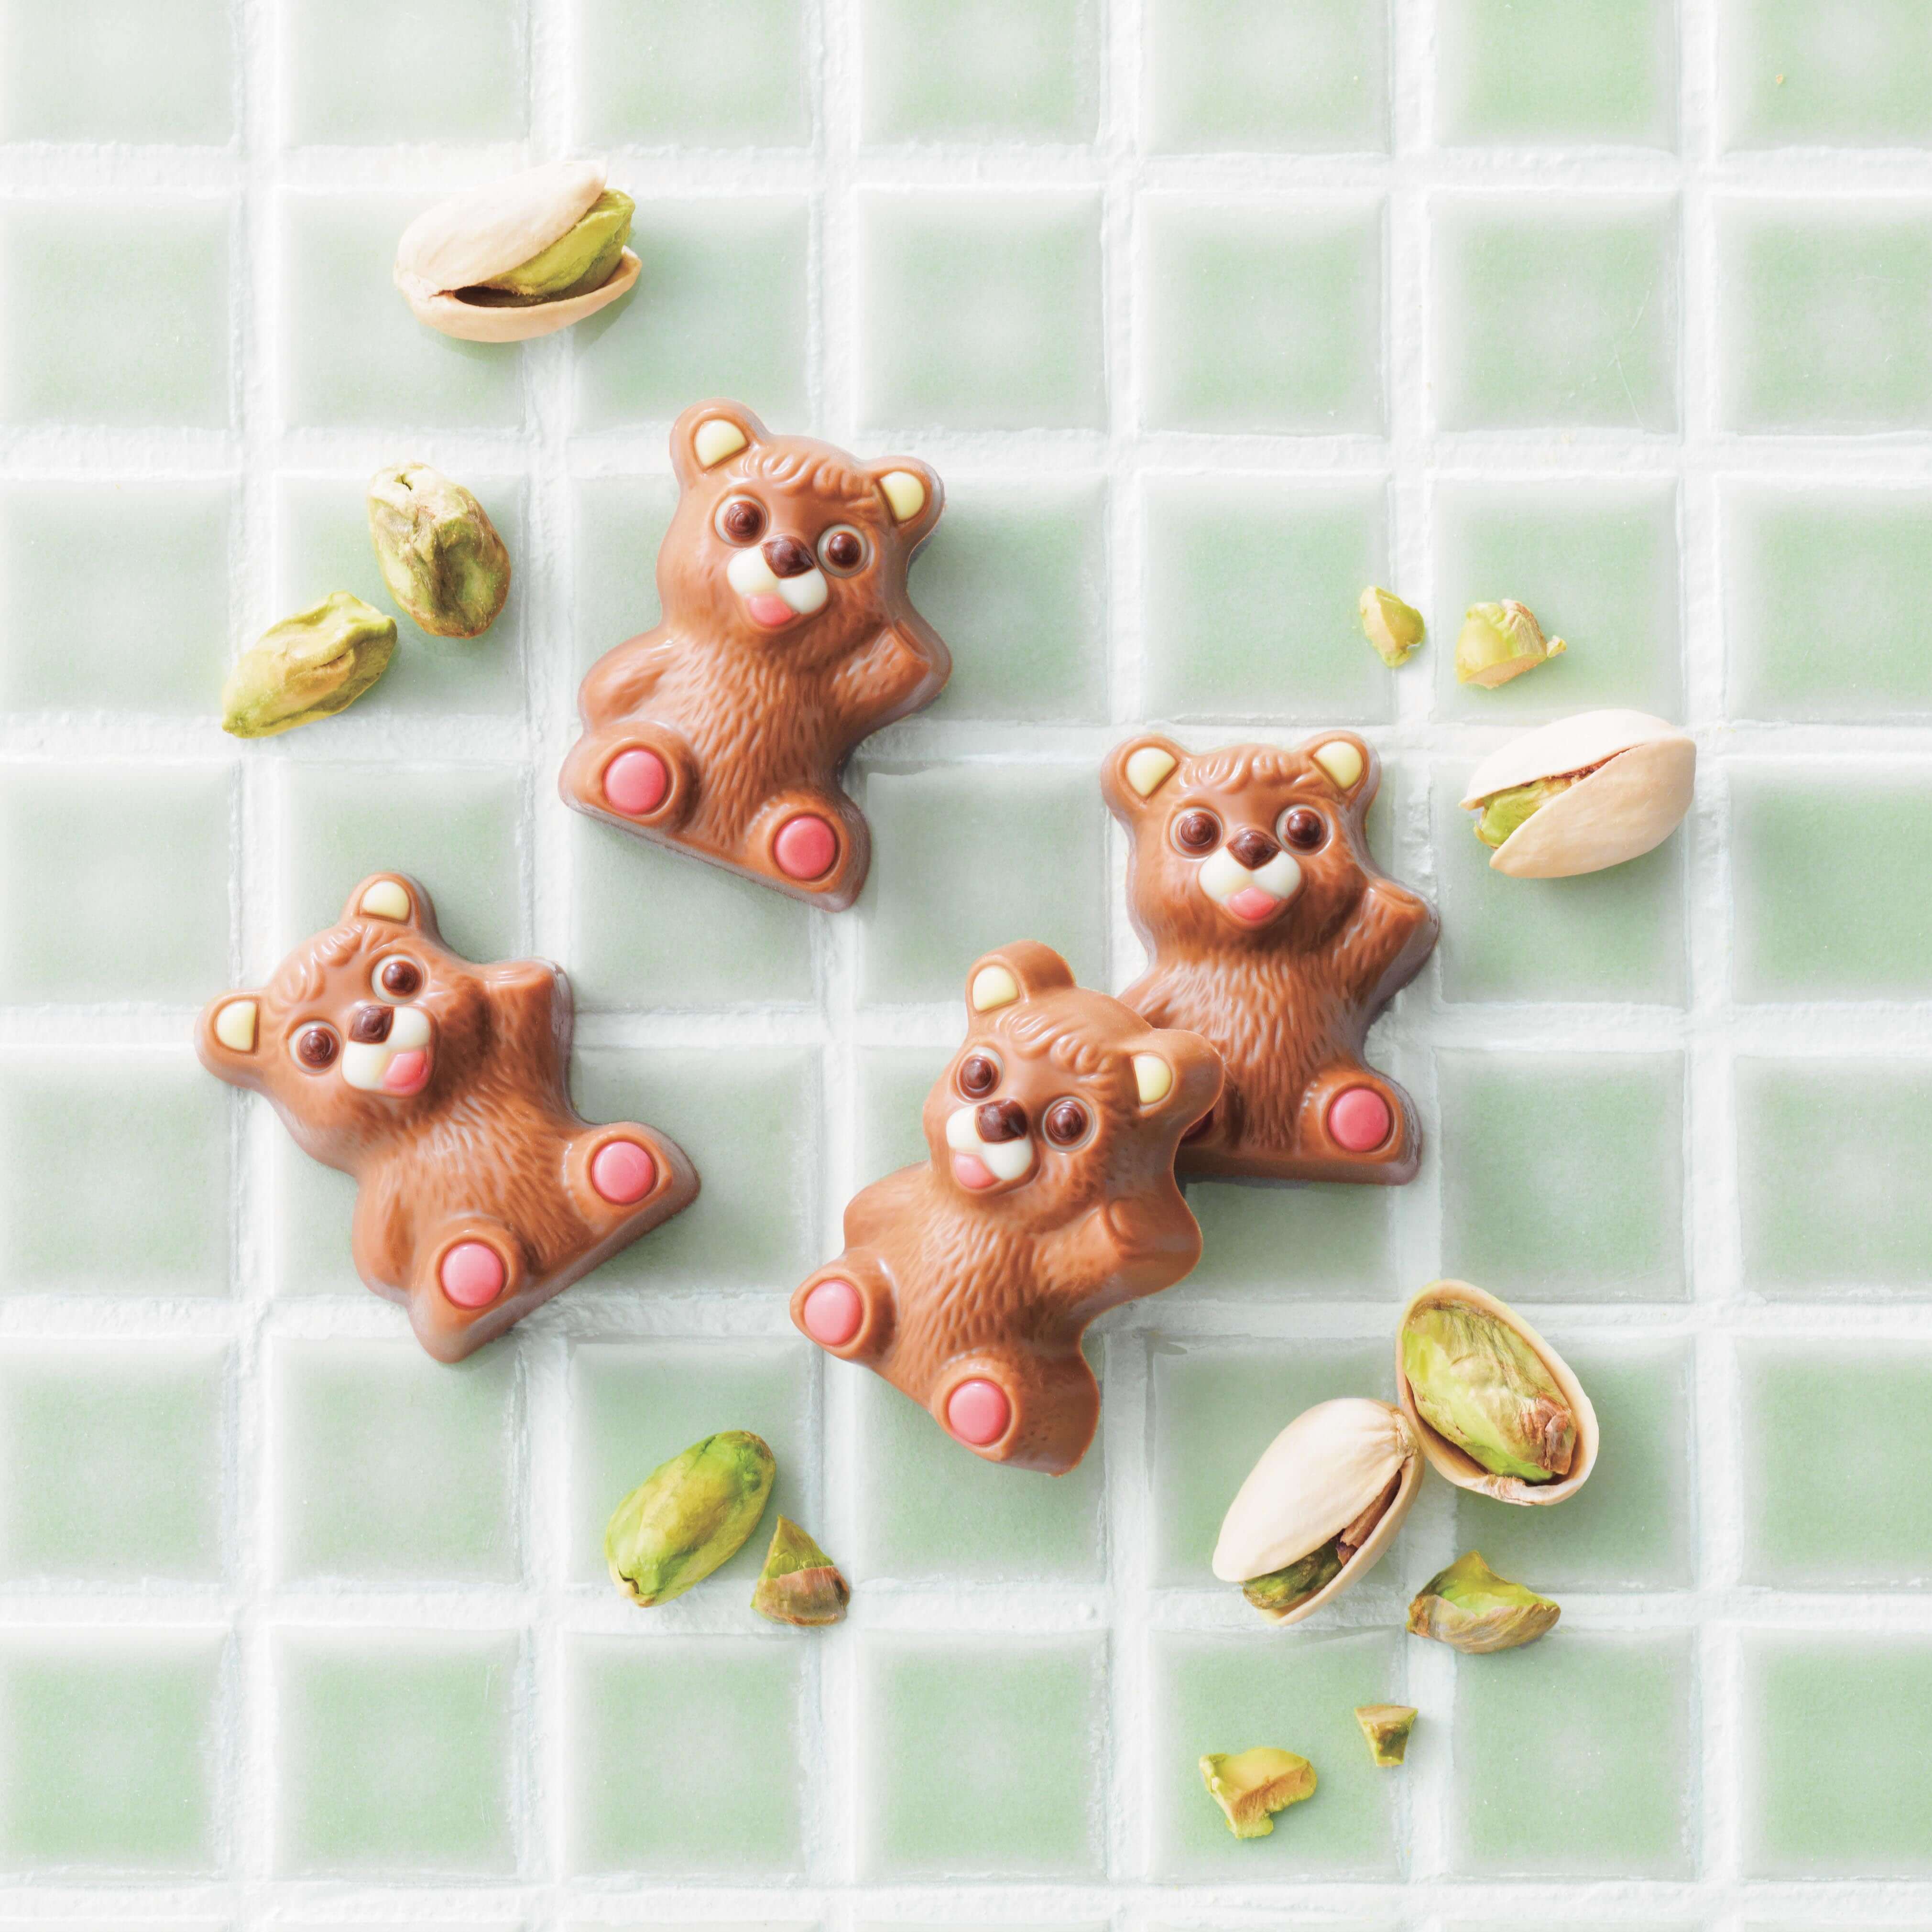 ROYCE' Chocolate - Petit Bear Chocolat "Pistachio (10 Pcs)" - Image shows brown, bear-shaped chocolates with accents of loose pistachio green nuts and beige shells. Background features green tiles with white spaces in between,